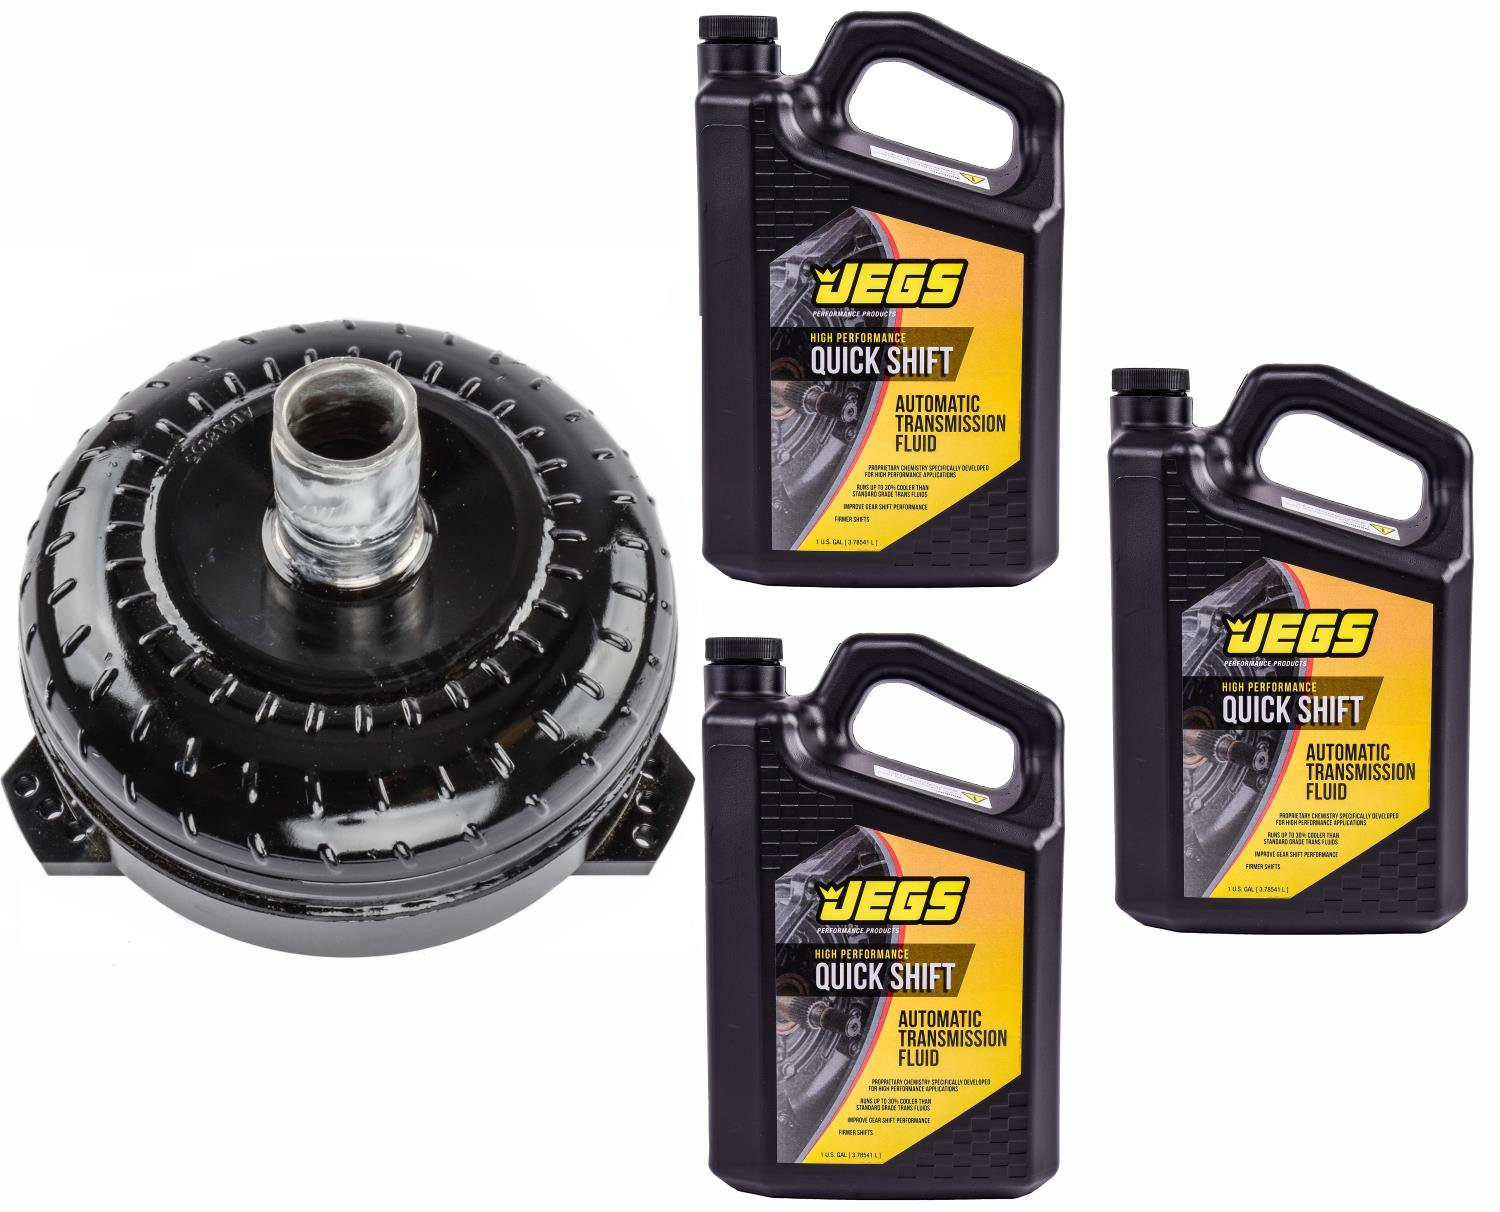 Torque Converter Kit for GM 4L80E/4L85E  Mounted to a Non-LS Series Engine [2900-3200 RPM Stall Speed]